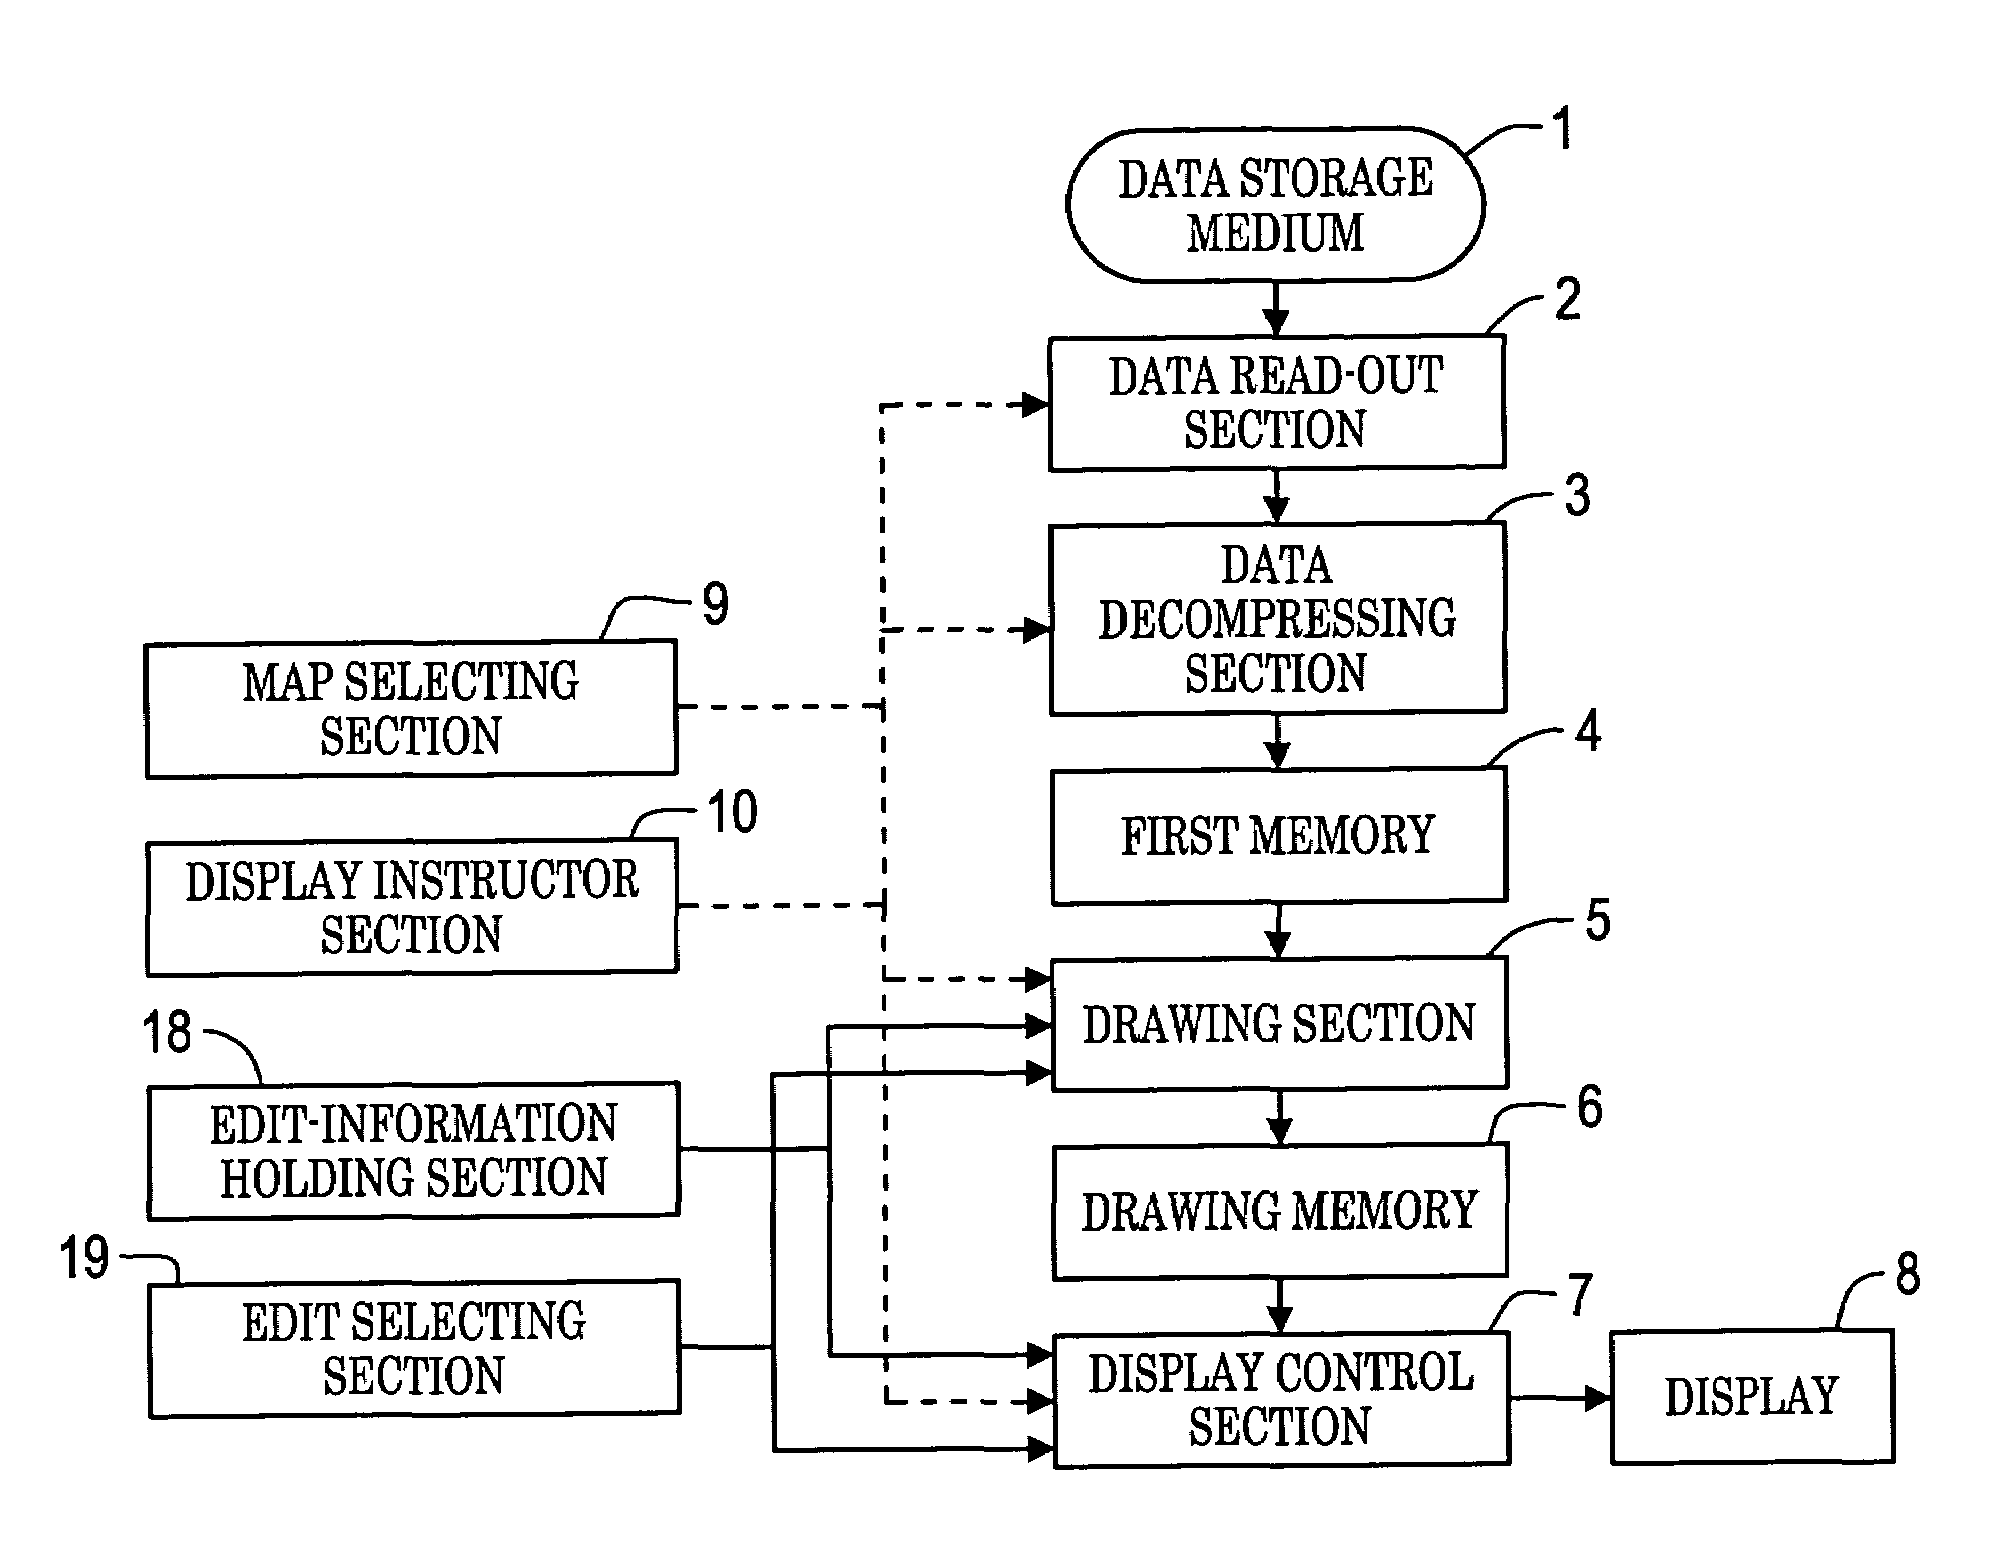 Unit and program for displaying map